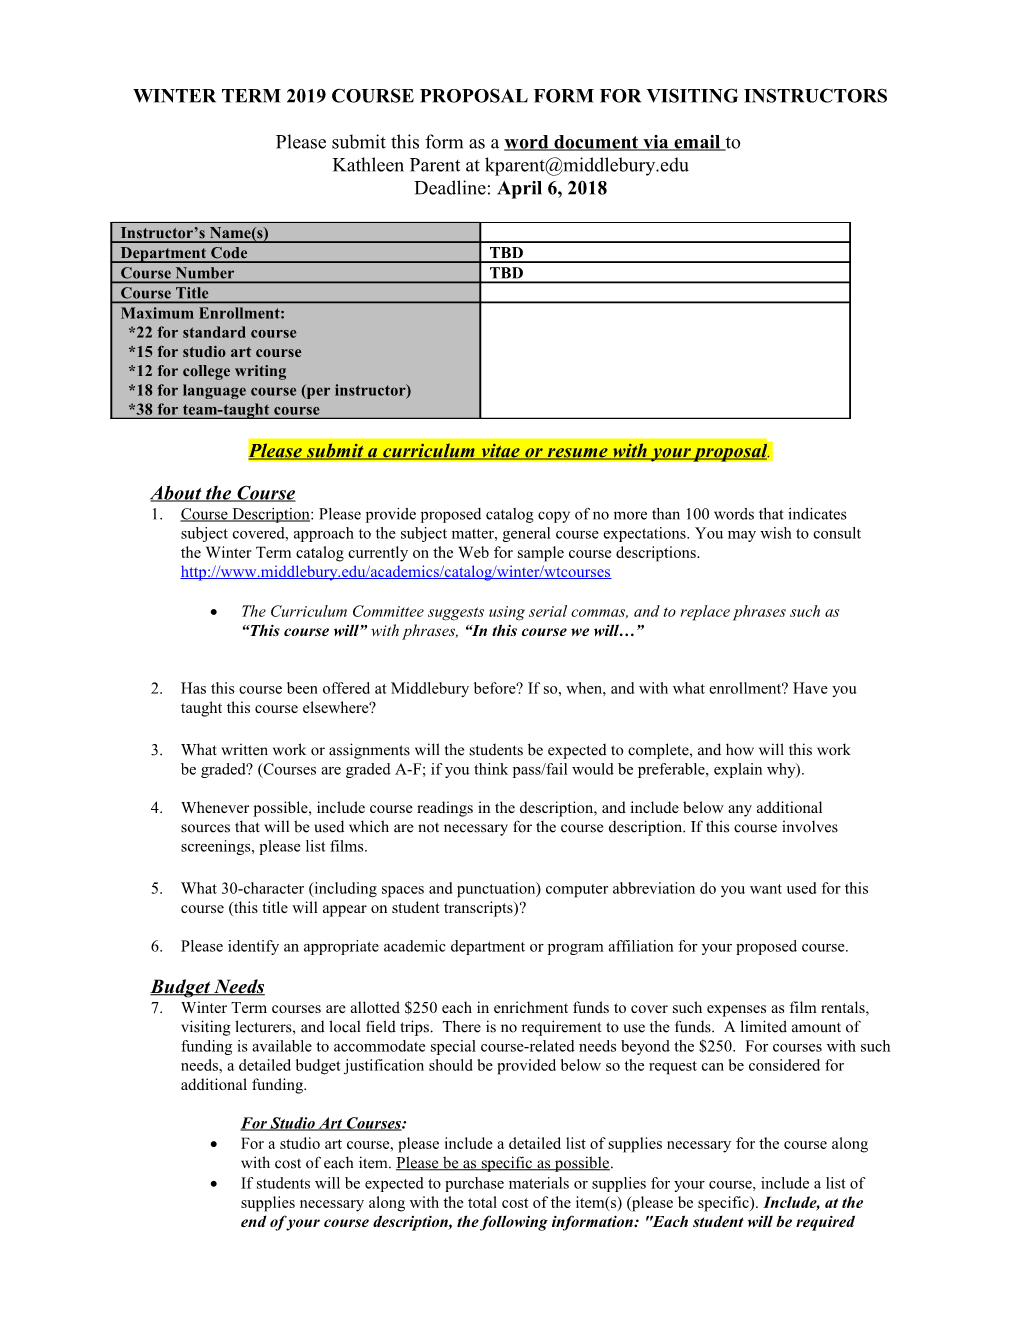 Winter Term 2007 Course Proposal Form For Visiting Instructors